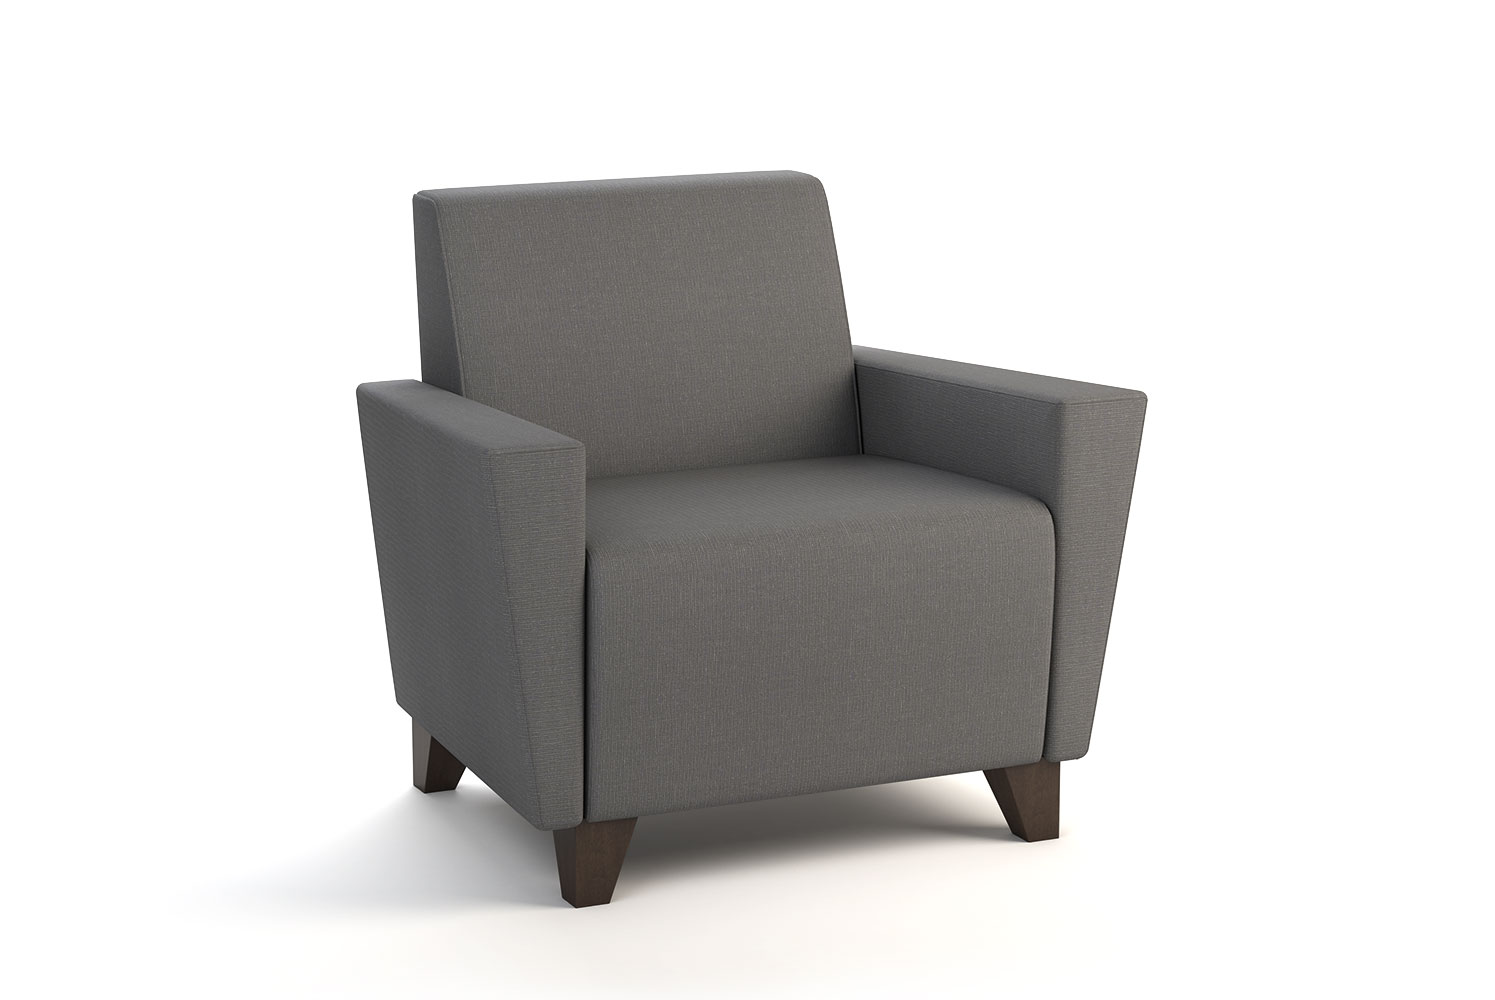 Flair Single seat Lounge with Wood Legs